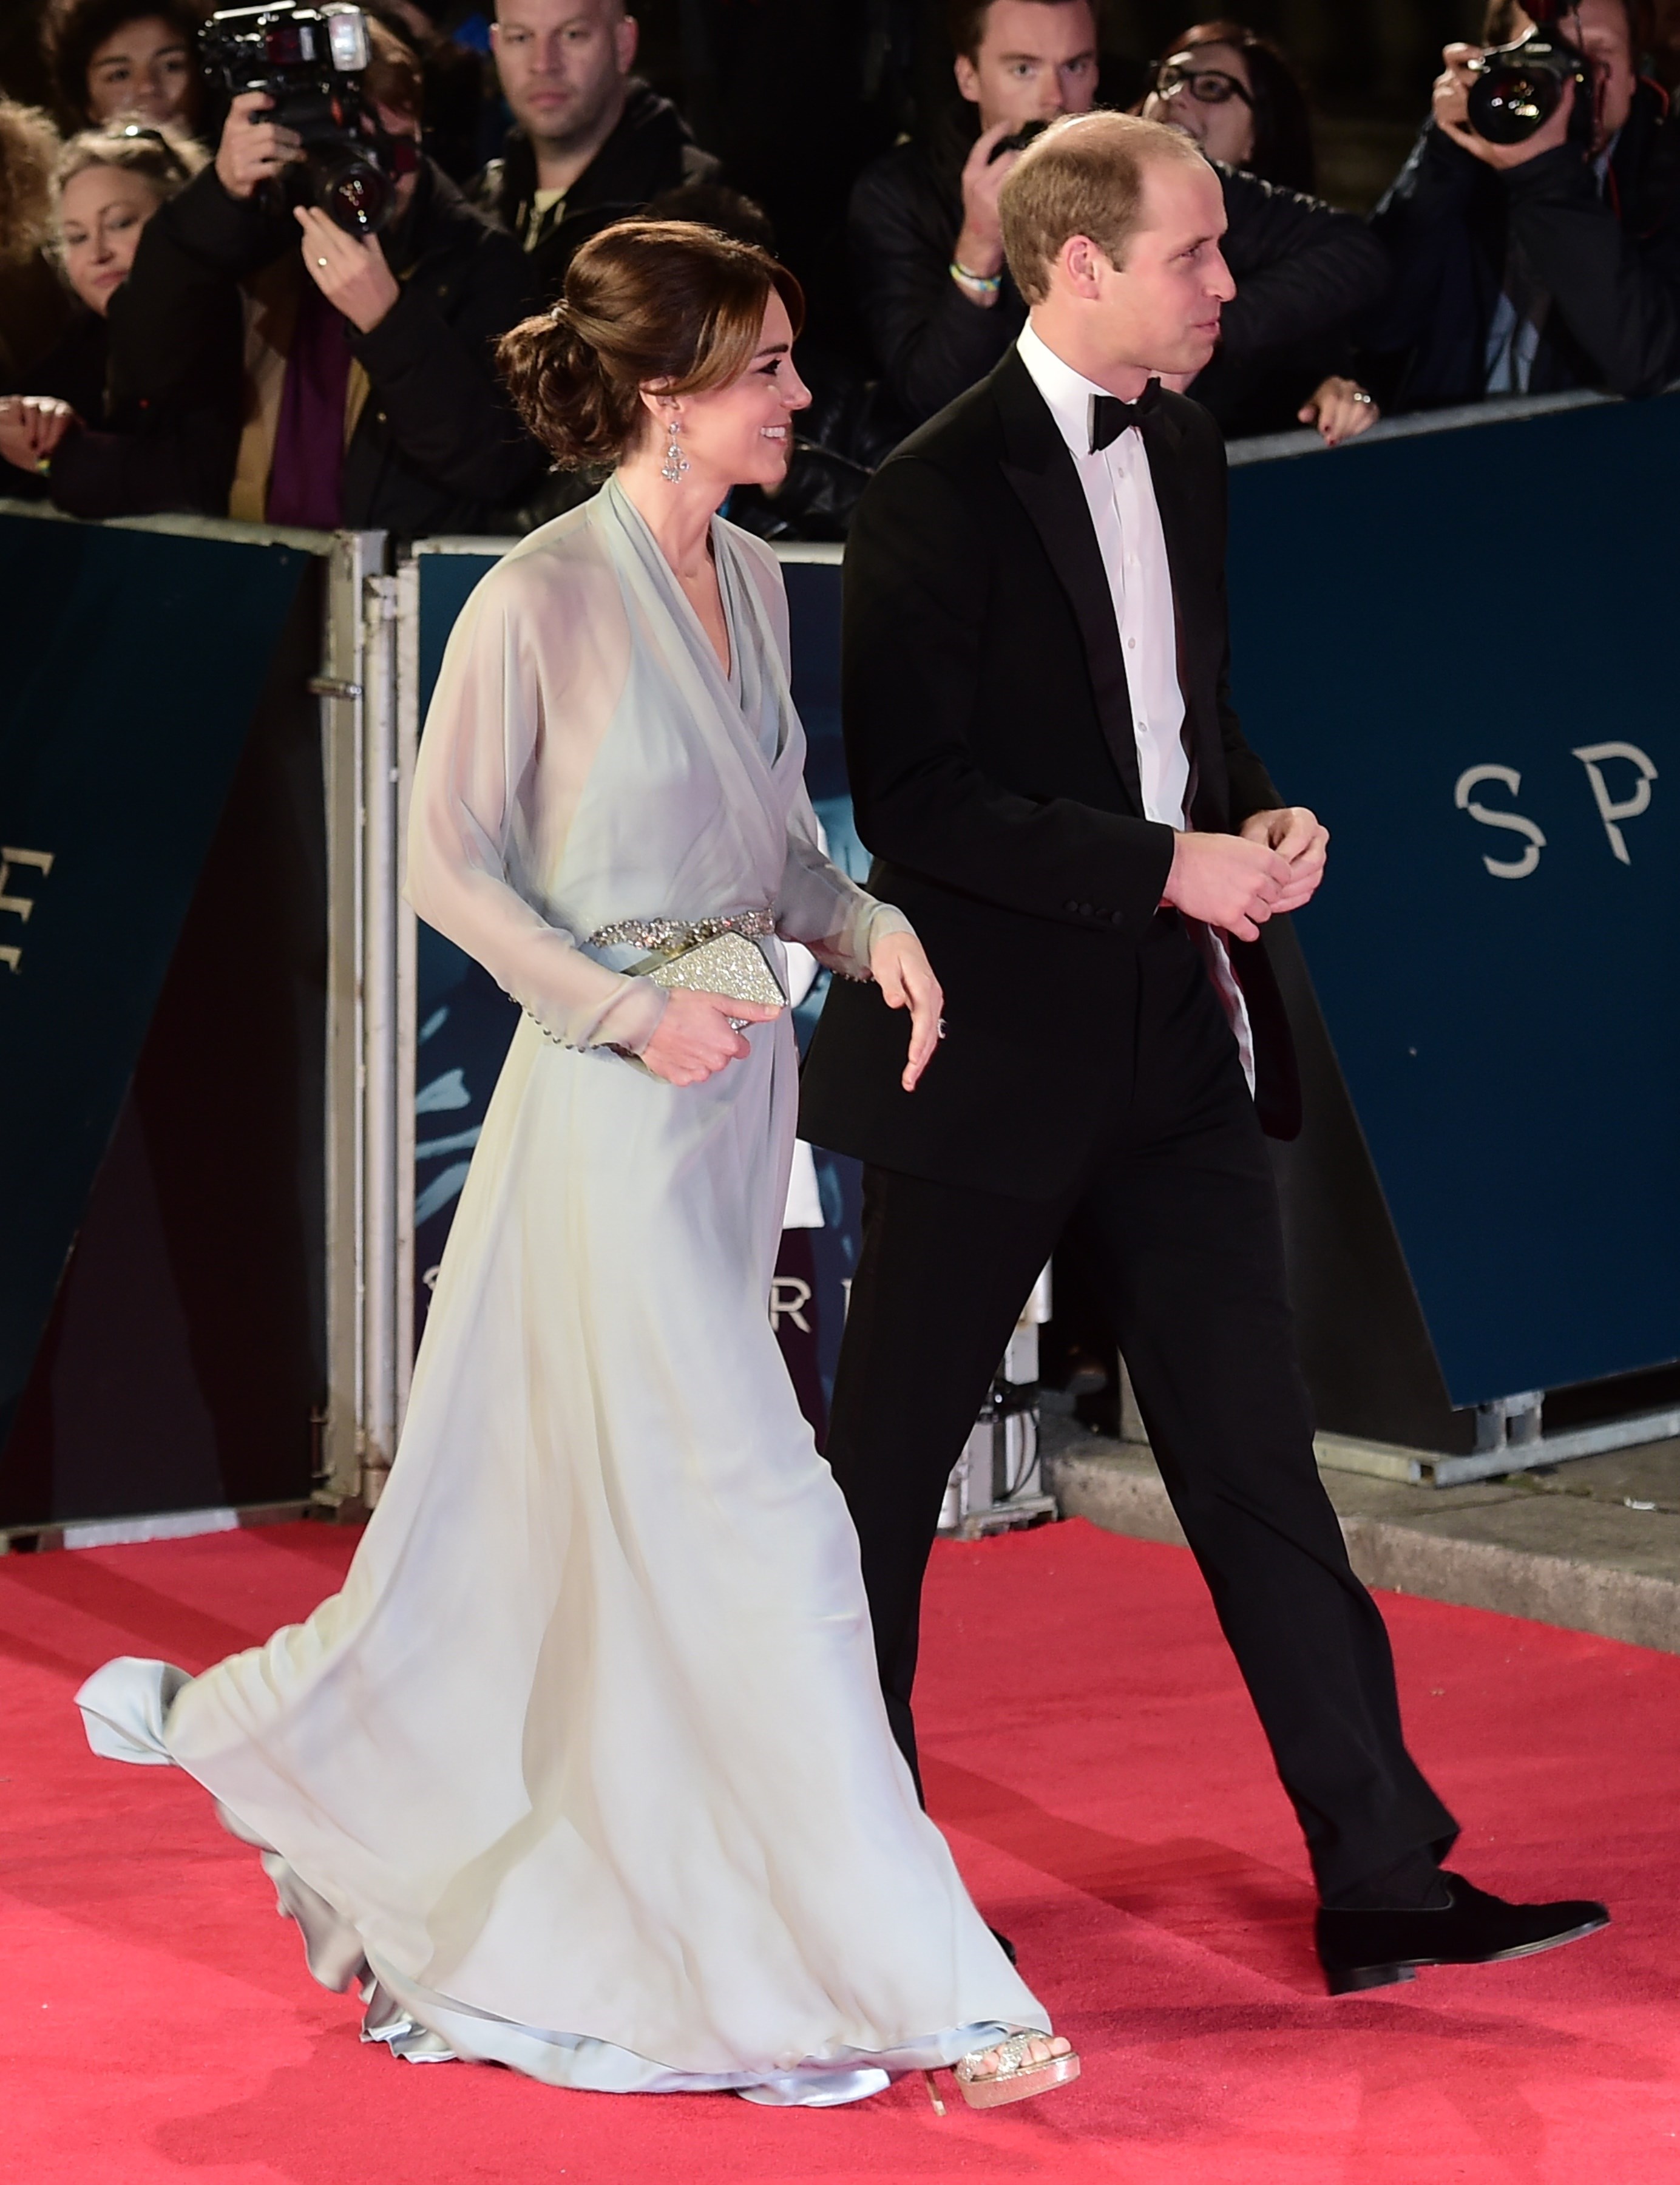 Kate Middleton and Prince Willliam arriving the premiere of the James Bond film 'Spectre'